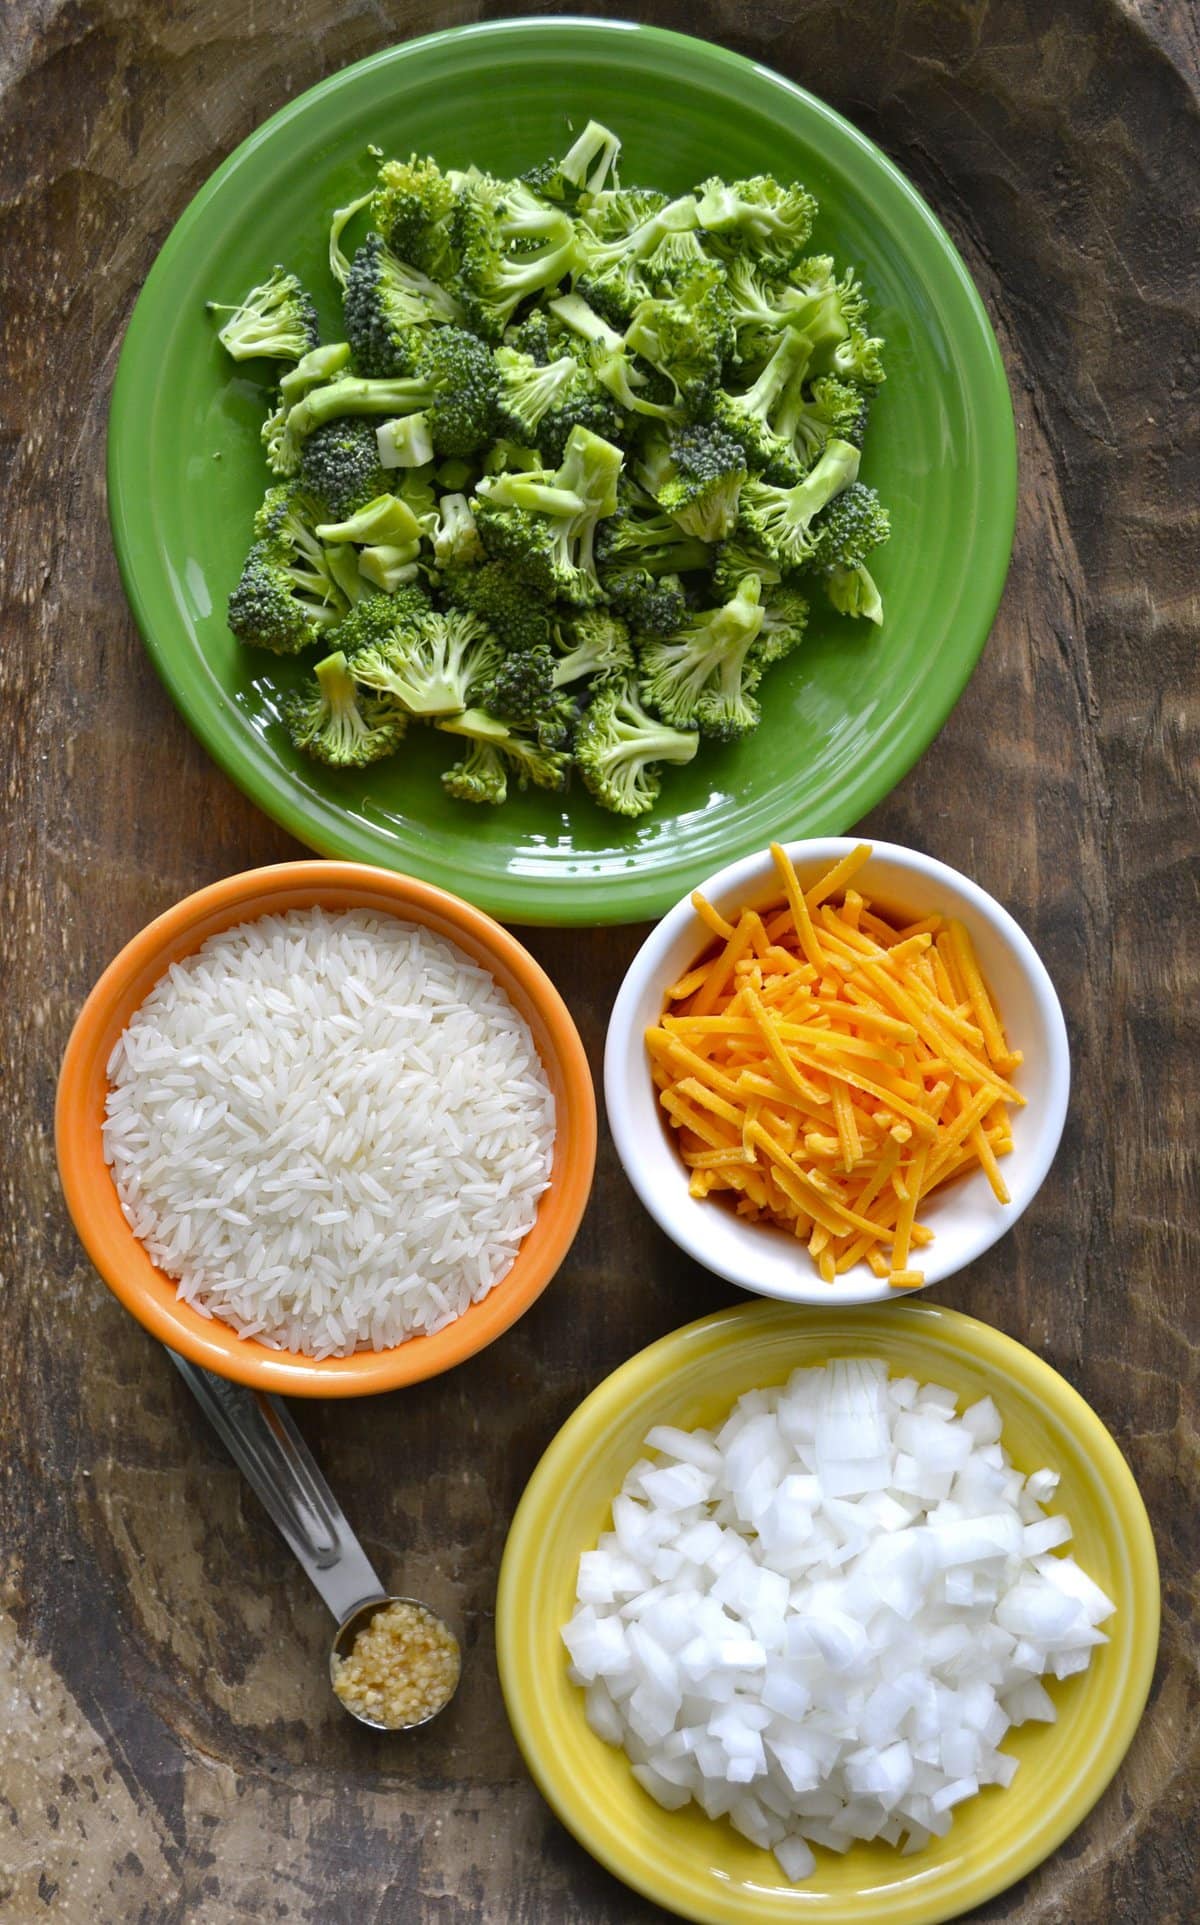 This Cheesy Broccoli Rice Casserole is the perfect one pan side dish that is loaded with tender broccoli and sharp cheddar cheese. This easy gluten-free side is perfect for even your pickiest eaters!